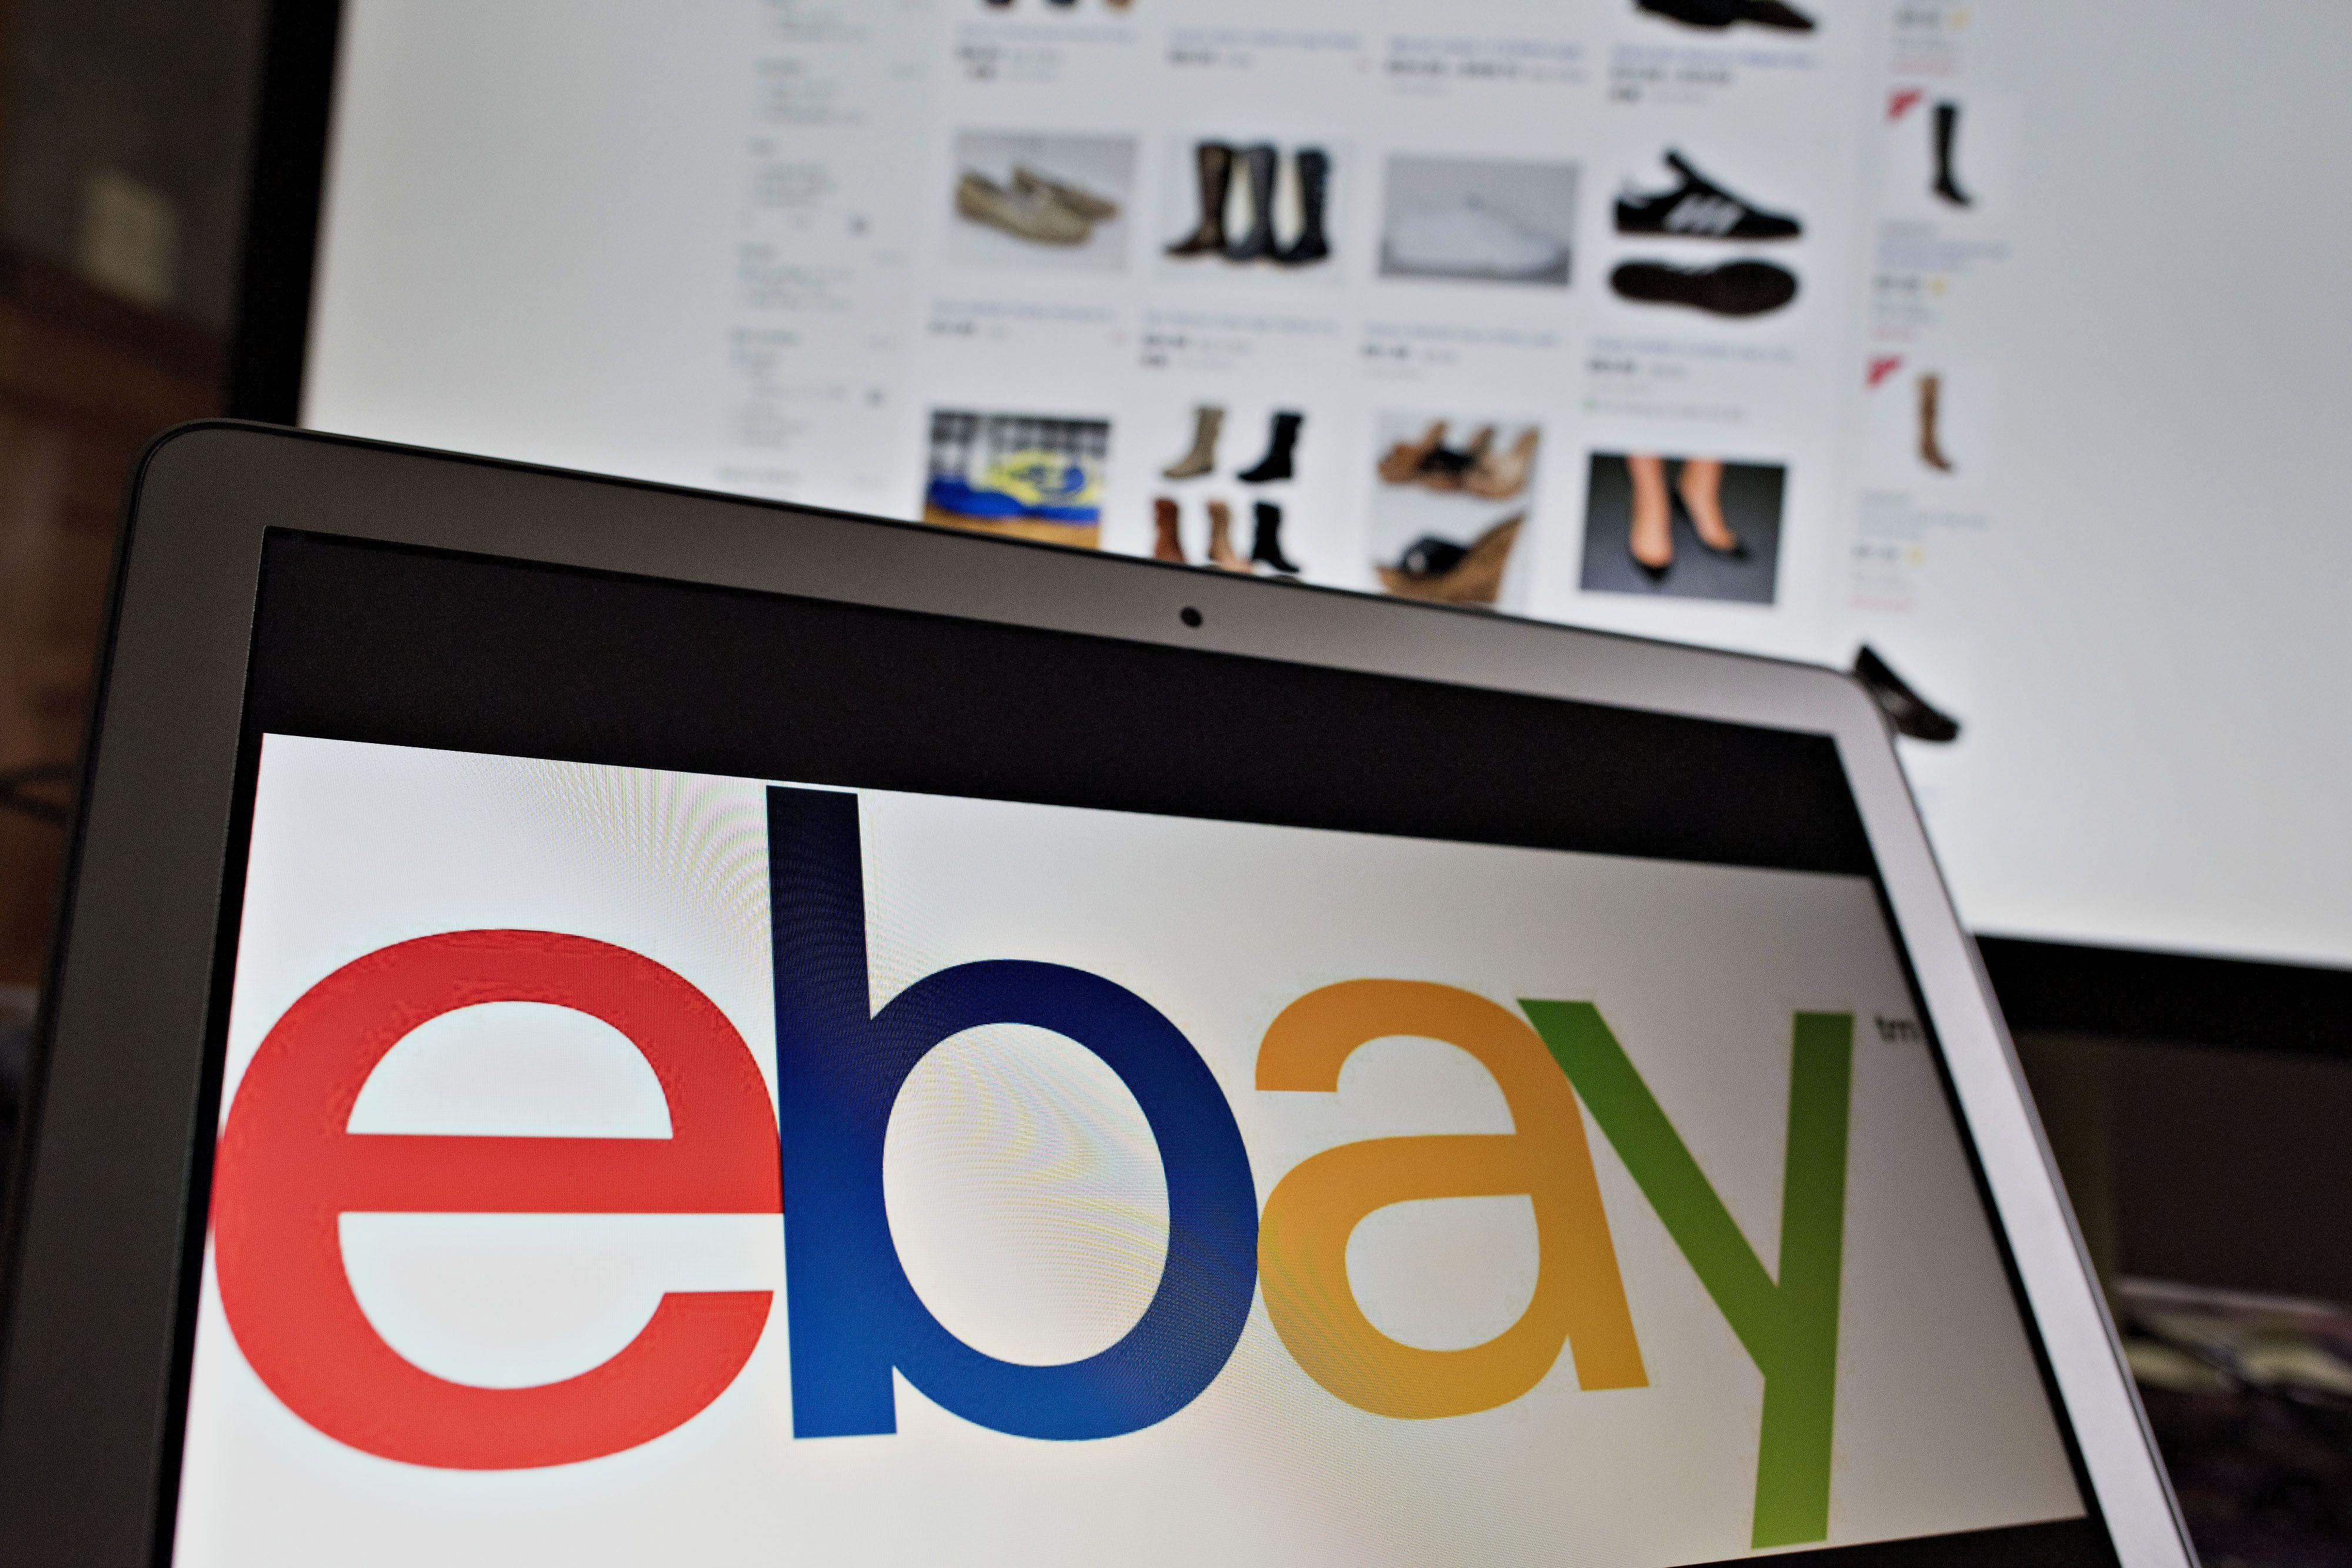 eBay App Logo - eBay: Using Mobile App Can Help Users Sell Items